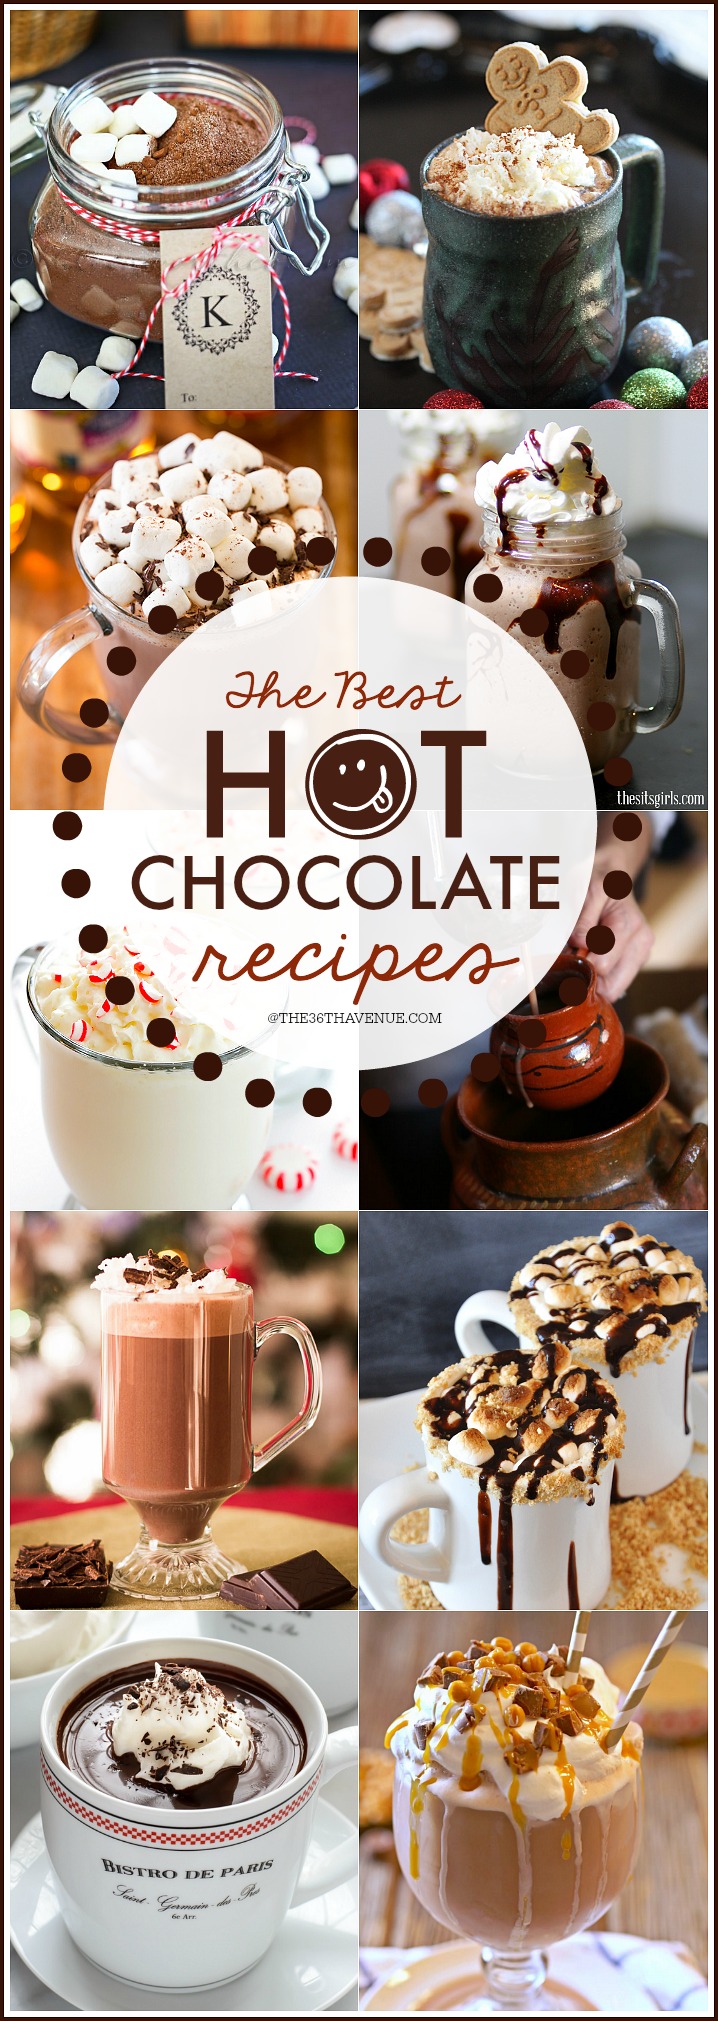 Hot Chocolate Recipes by the36thavenue.com